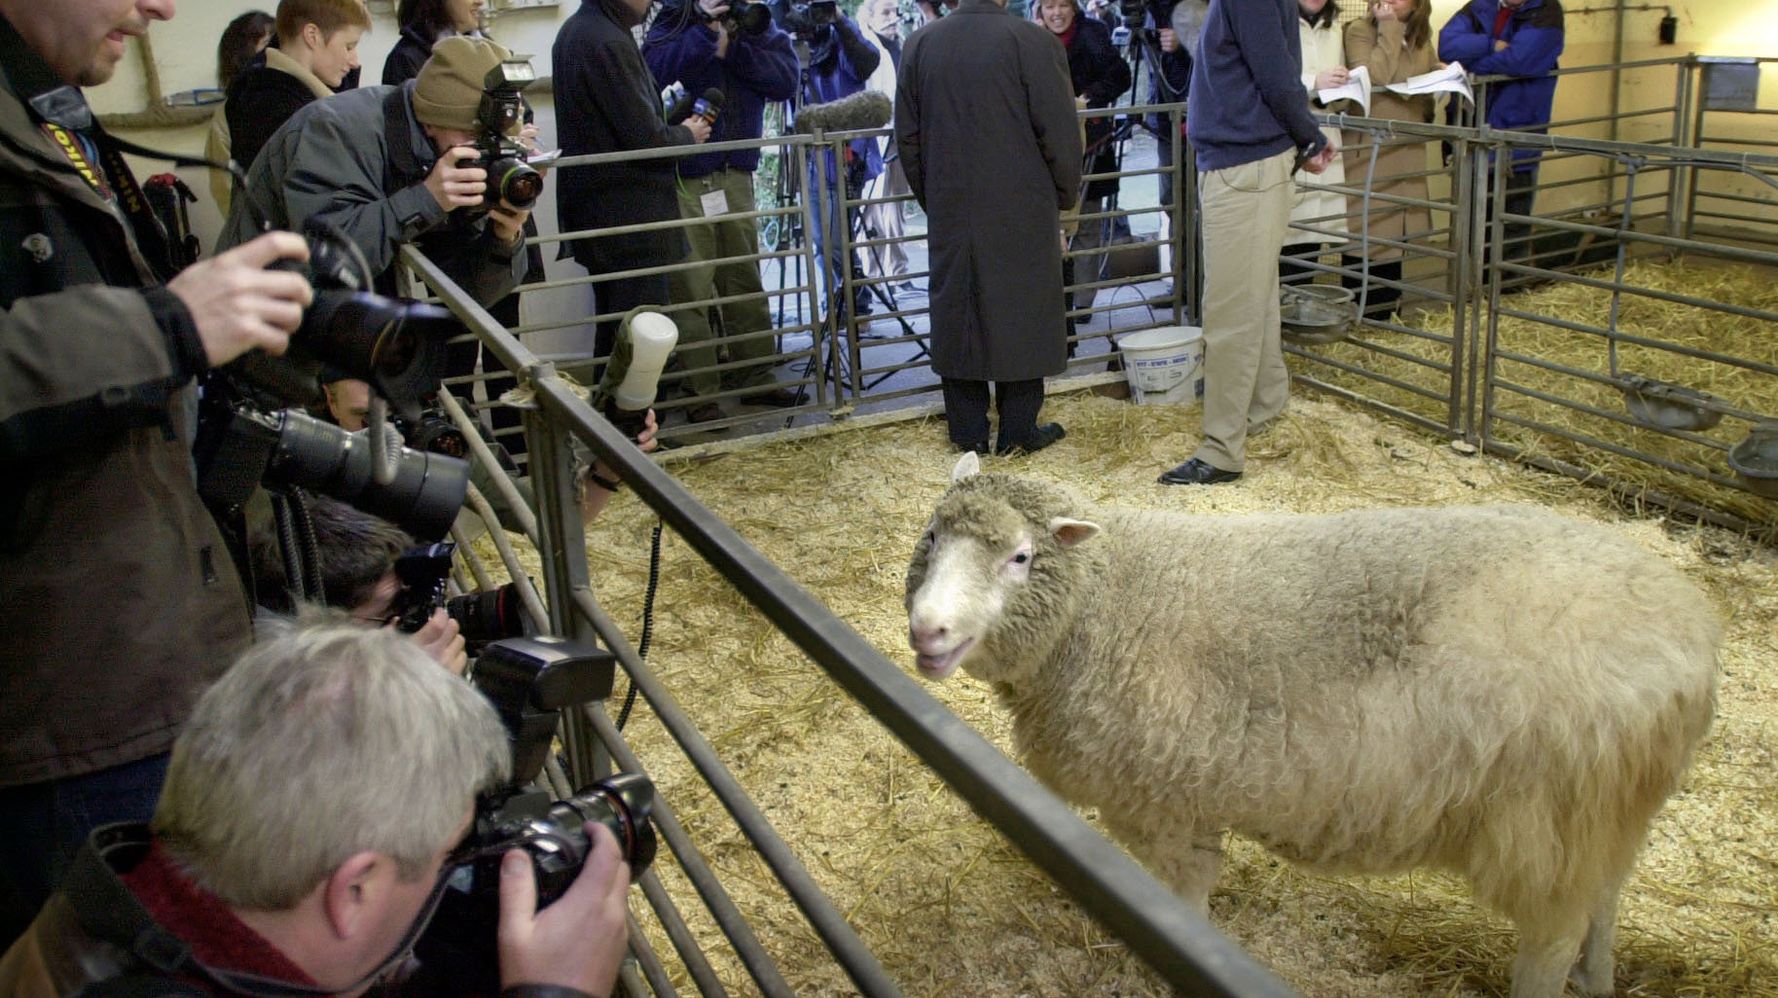 Two Decades After Dolly the Sheep, Here's What We've Learned About Cloning